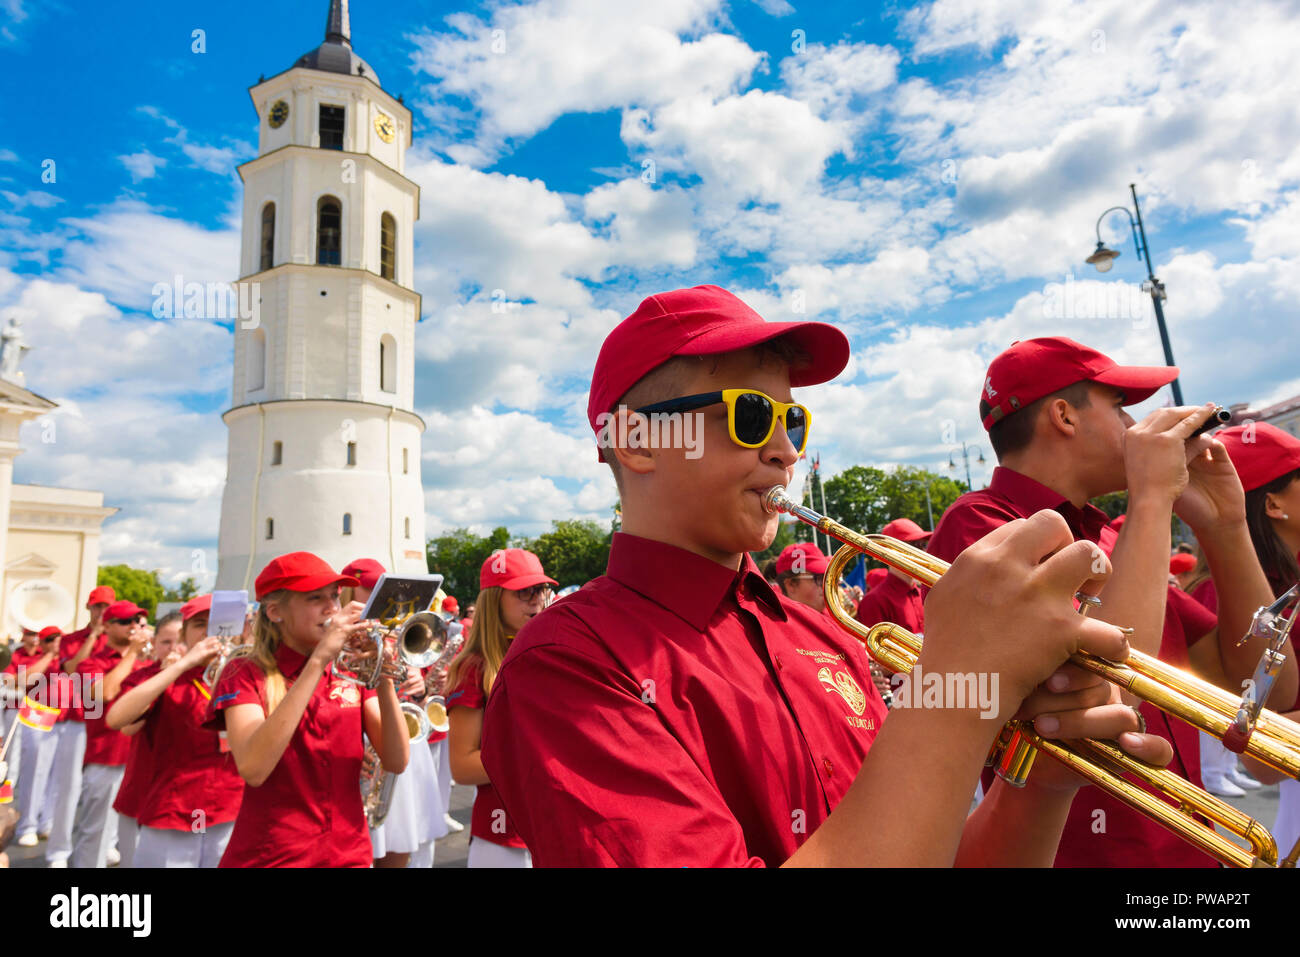 Vilnius festival, view of a young people's marching band parading through Cathedral Square in the Lithuanian Song and Dance Festival, Vilnius Old Town. Stock Photo